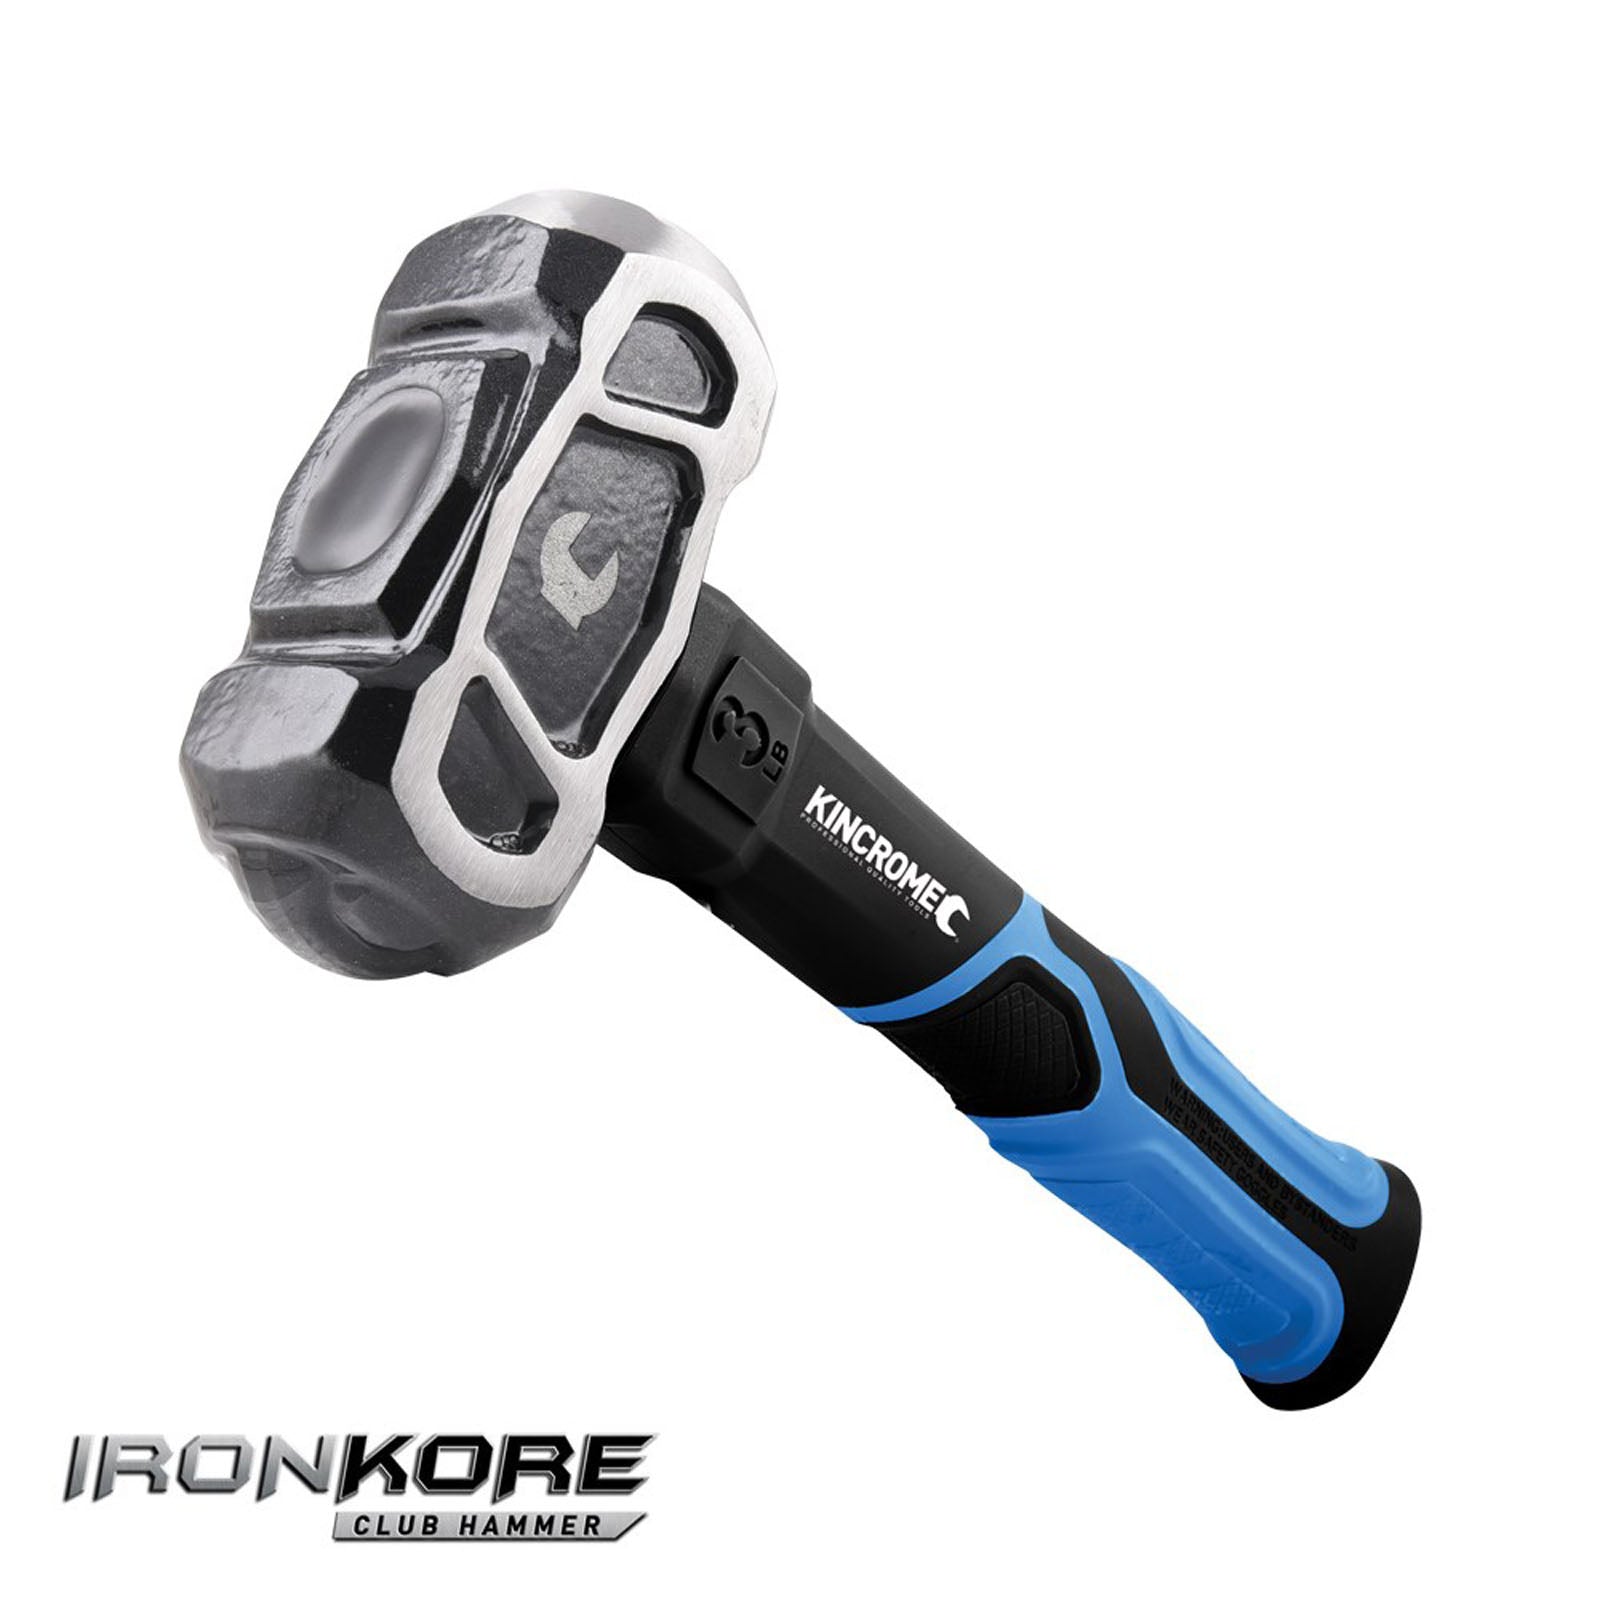 IRONKORE Club Hammer 1.35kg/3LB - K9083 by Kincrome